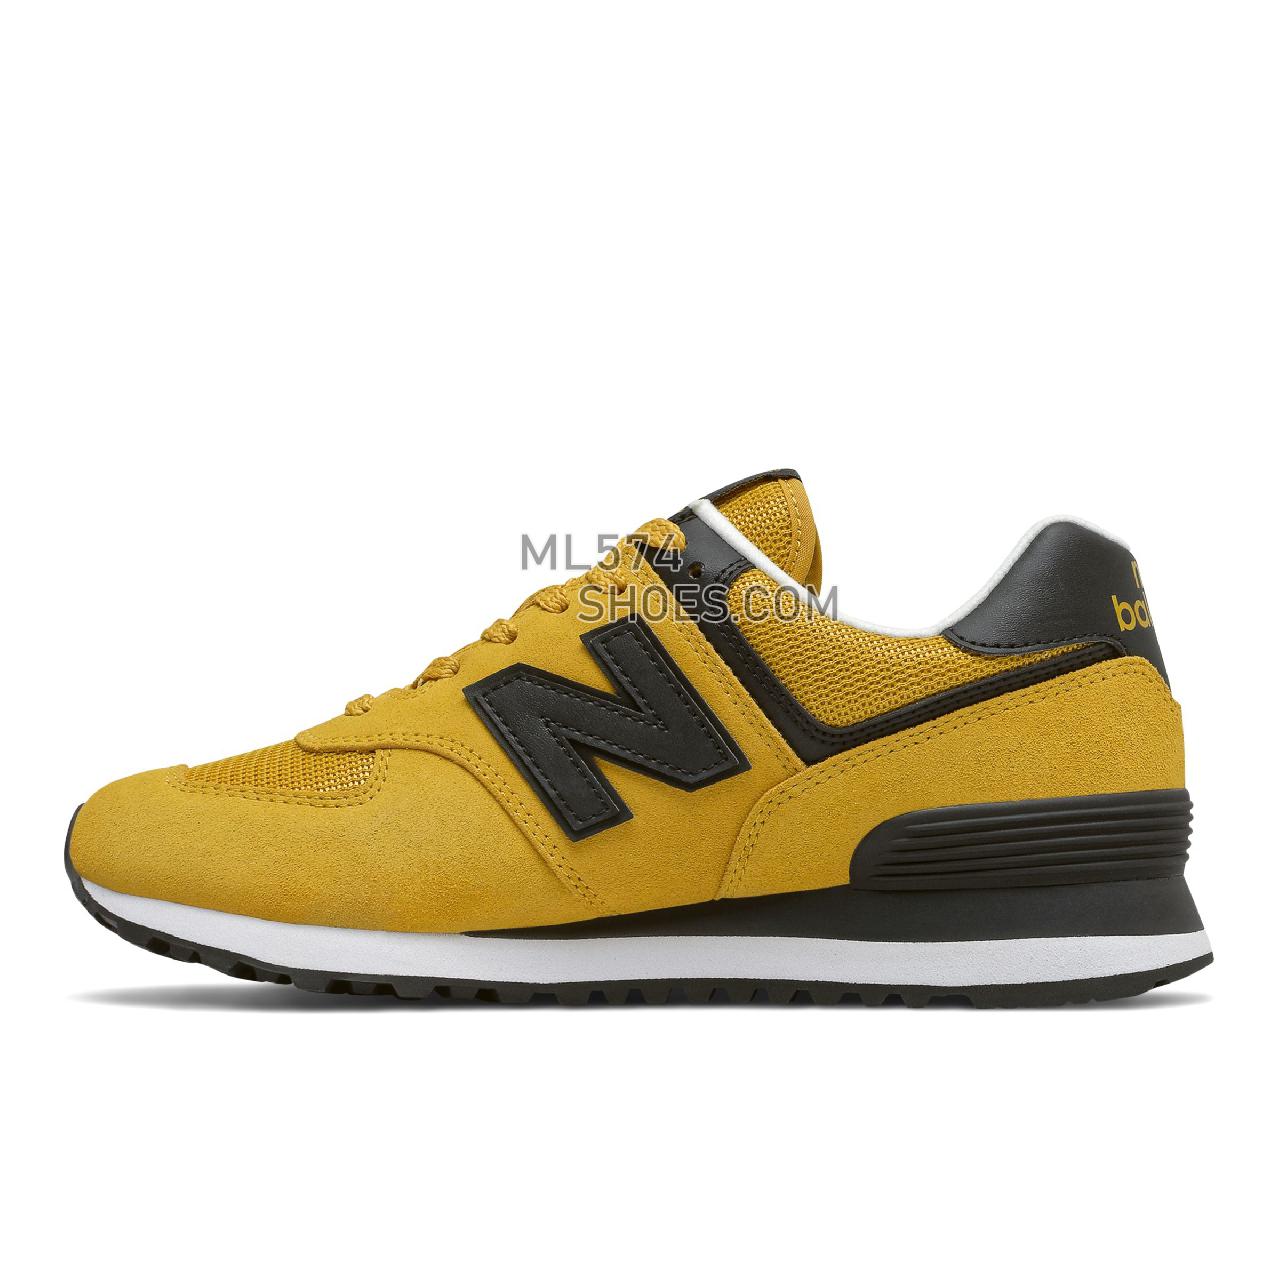 New Balance 574 - Women's Classic Sneakers - Harvest Gold with Black - WL574MC2